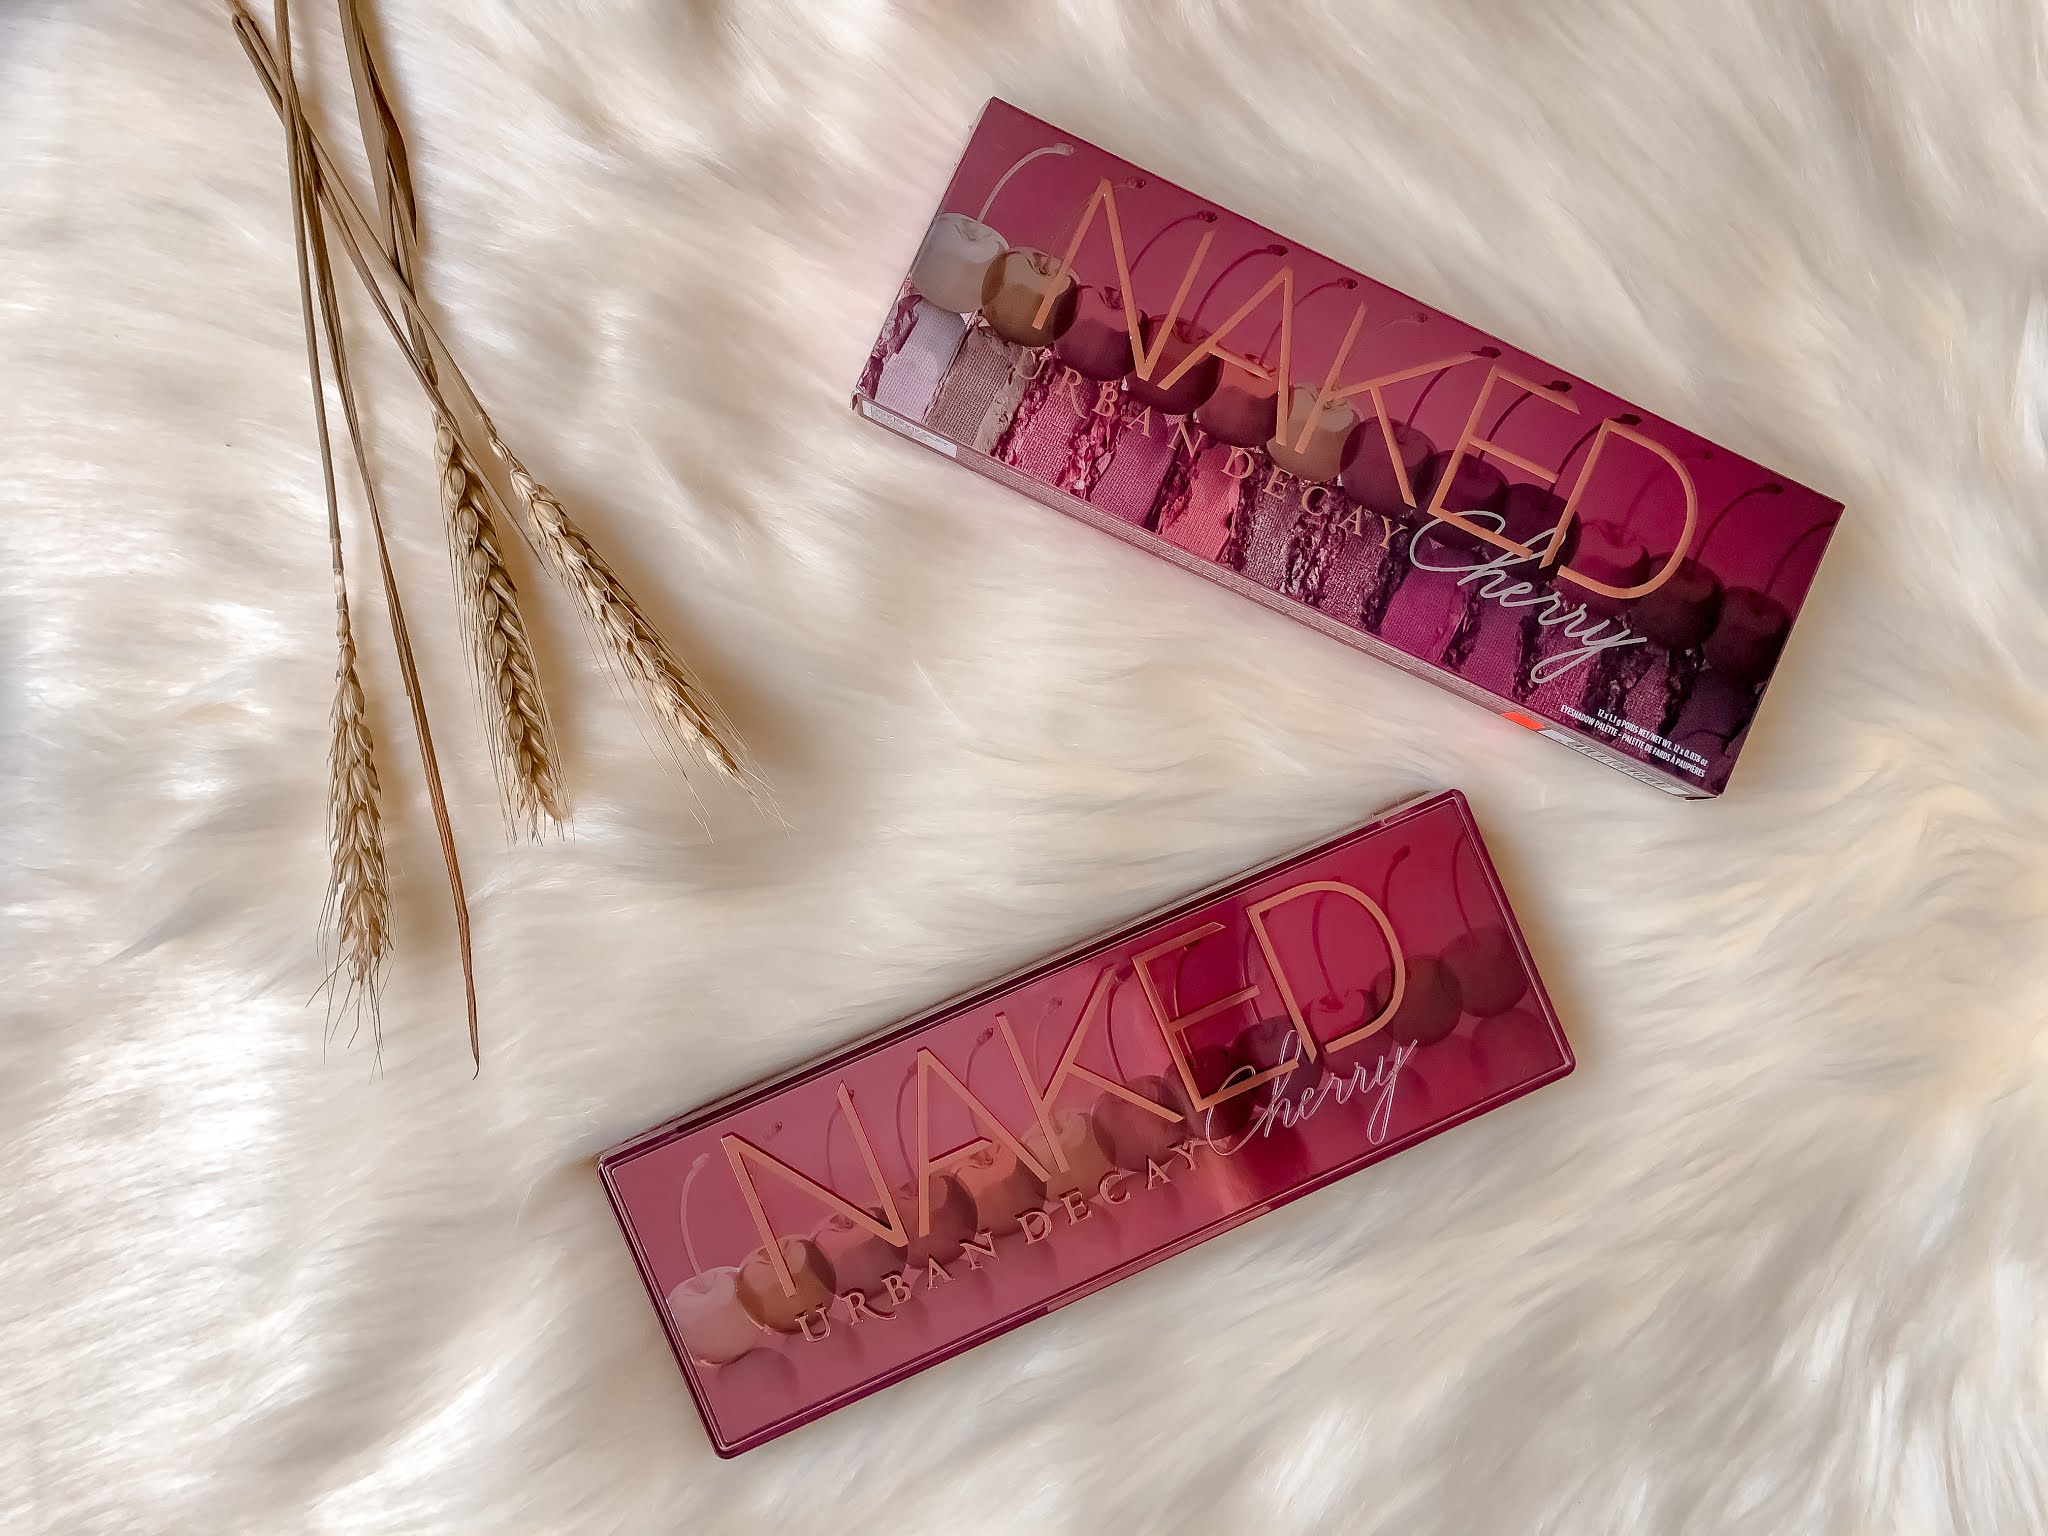 Urban Decay Naked Cherry Palette Review